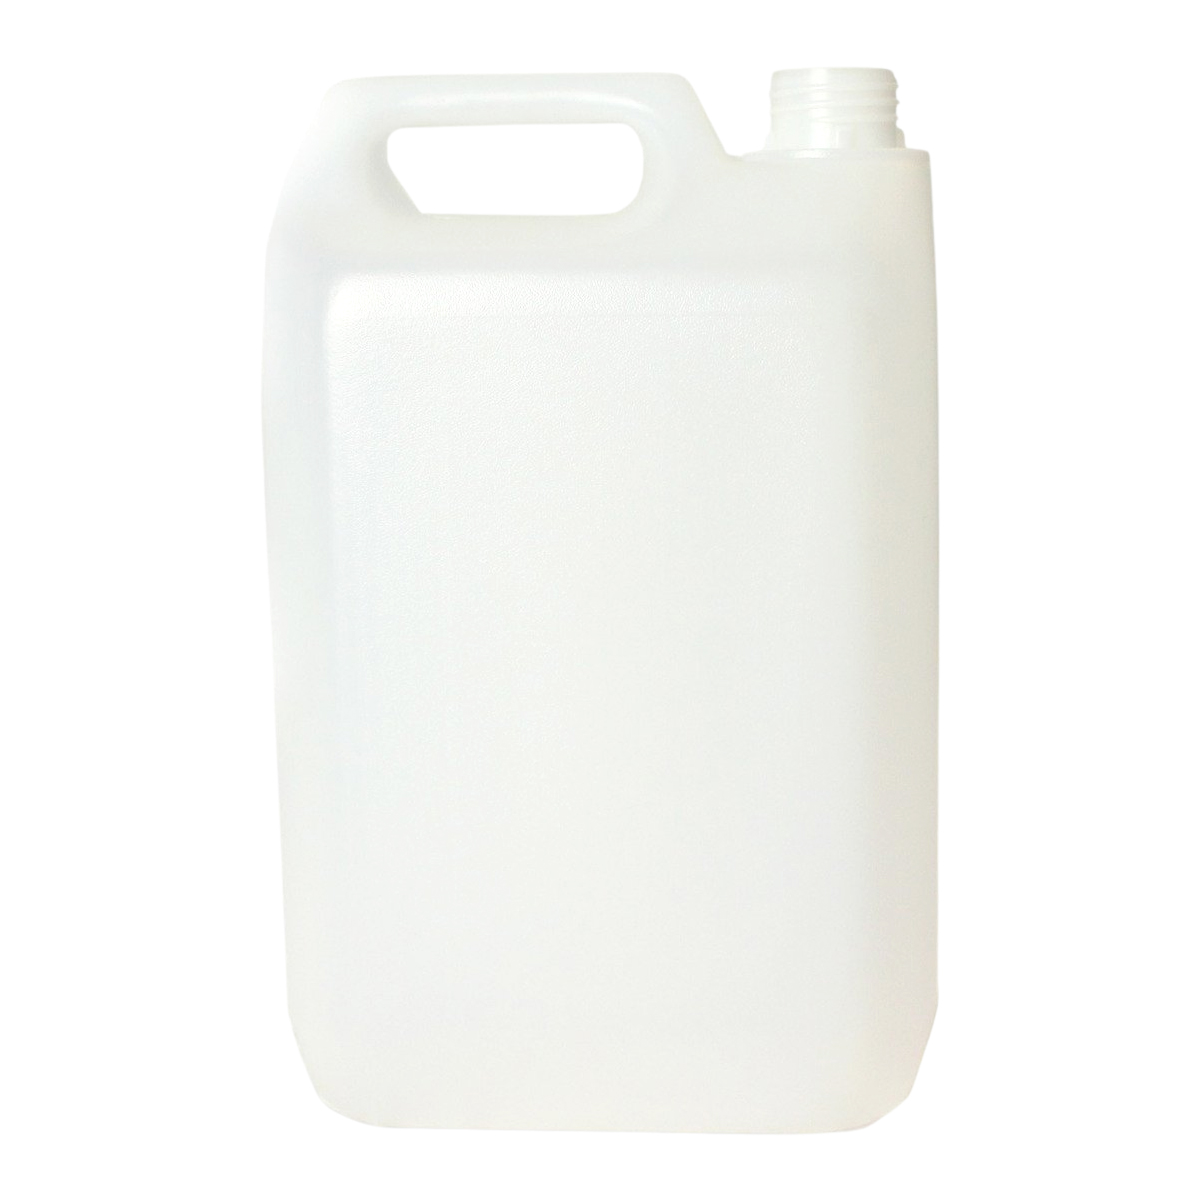 5l jerry can